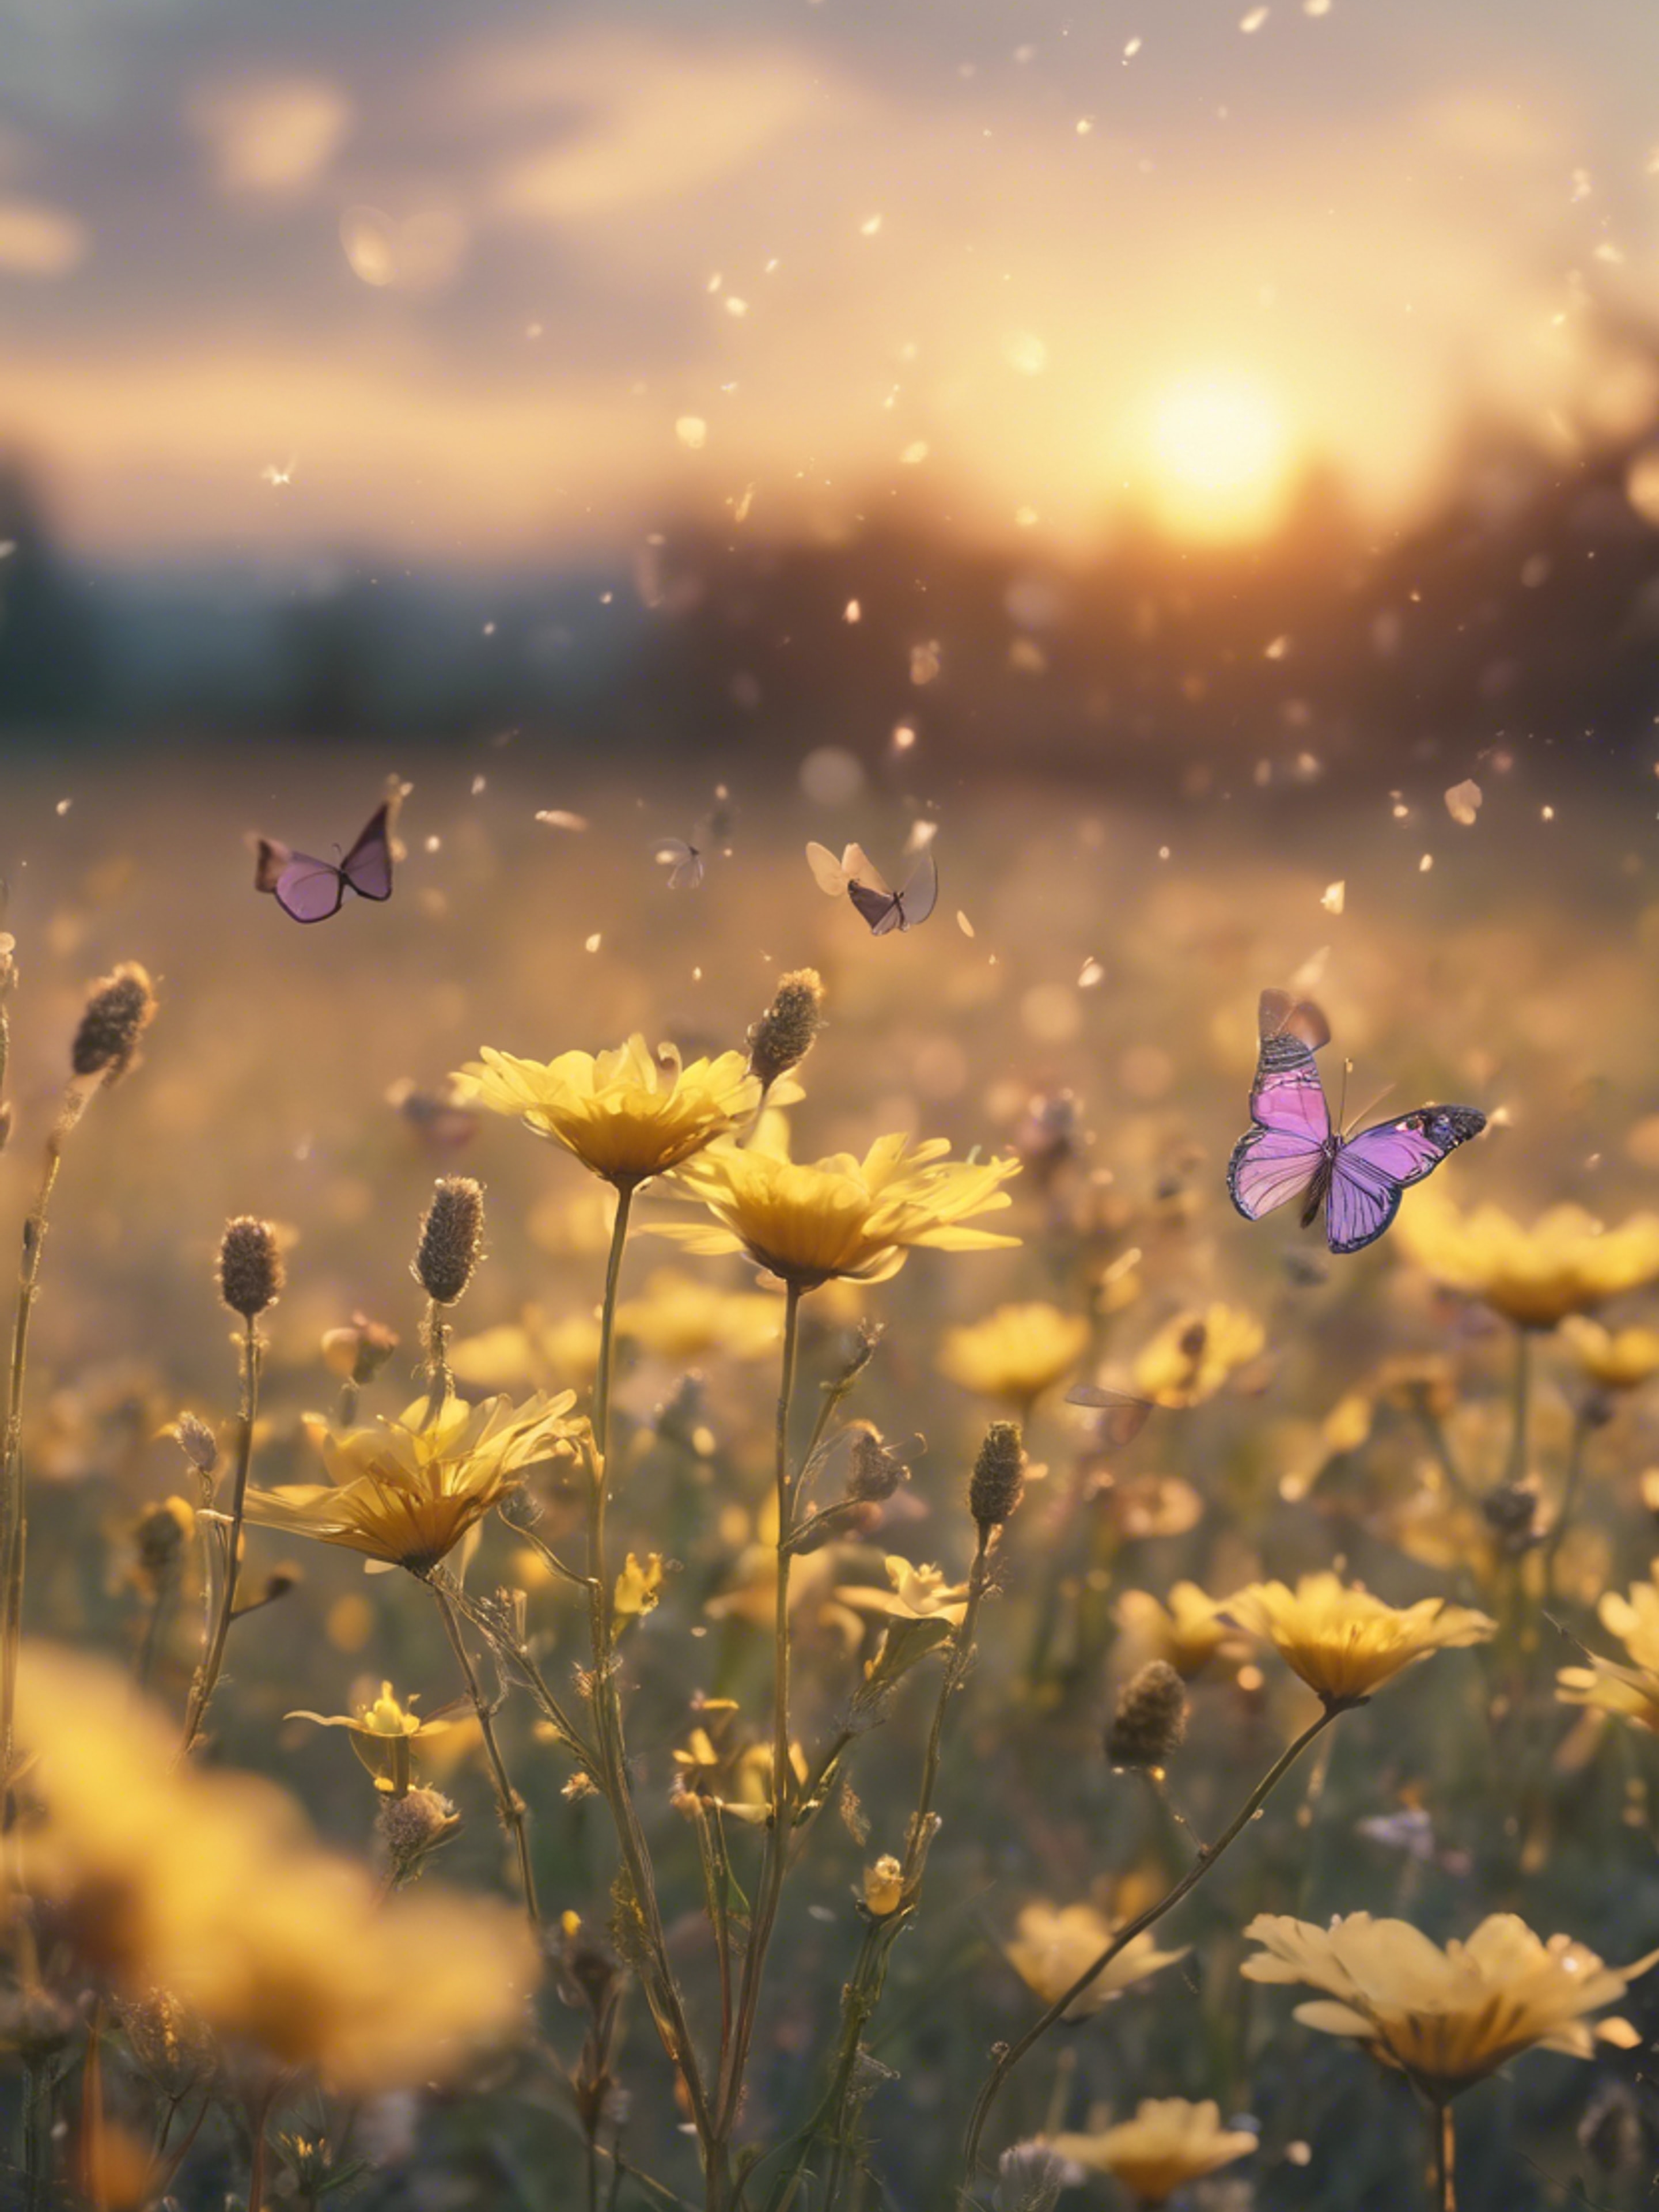 Sunset scene overlooking a meadow filled with pastel yellow flowers and kawaii butterflies fluttering above them. Валлпапер[4de922e1f50d428d8d1a]